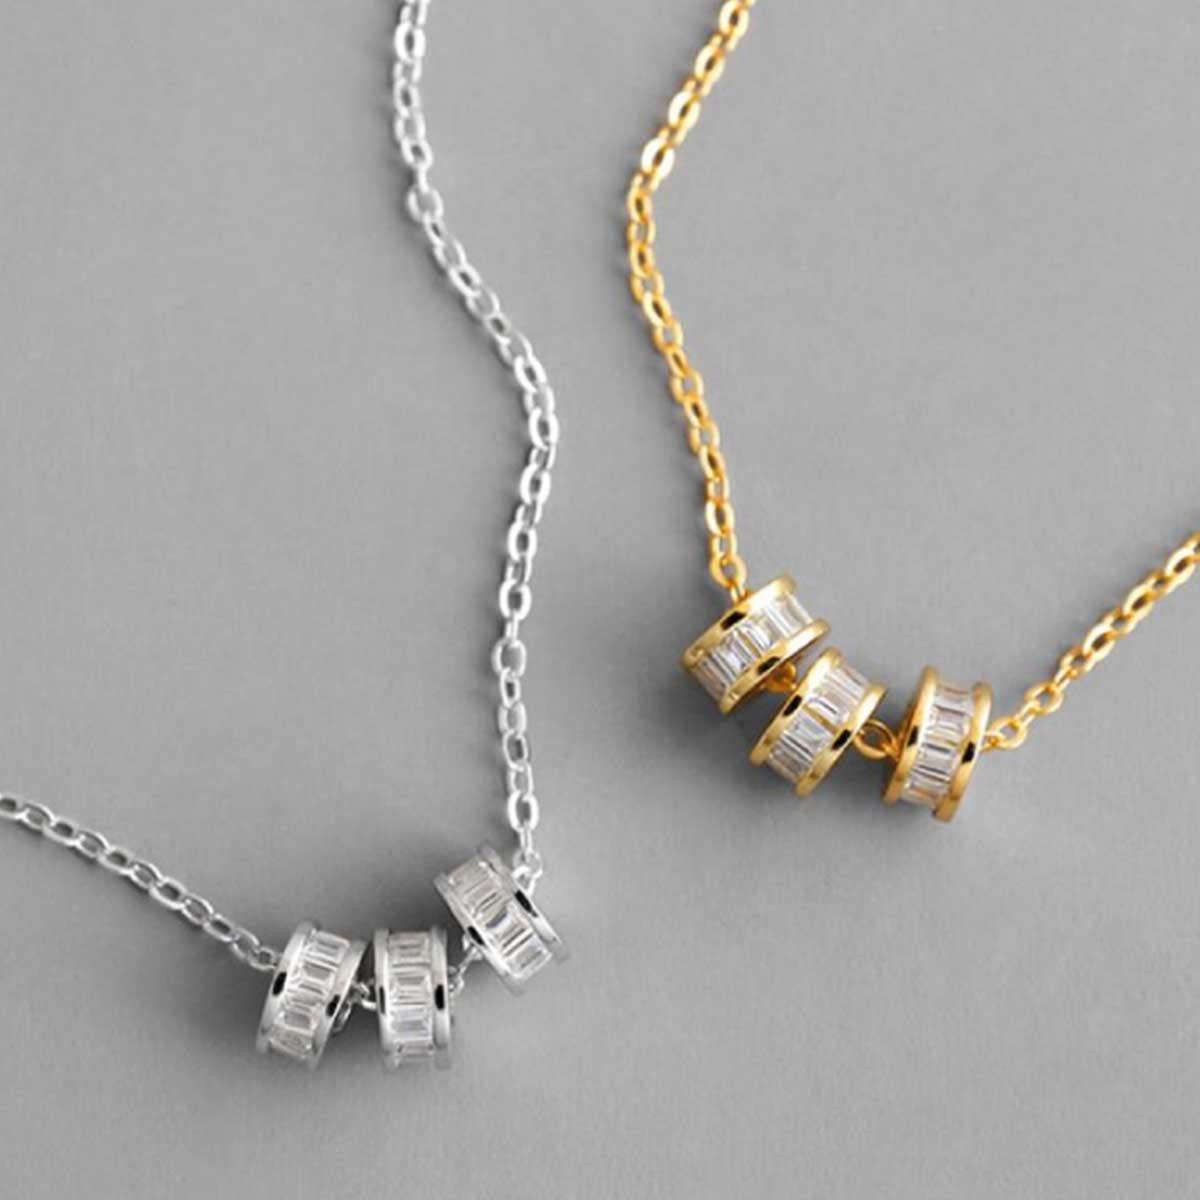 Flattering gold and silver plated necklaces with three dainty wheel shaped charms studded with white cubic zirconias handmade from sterling silver